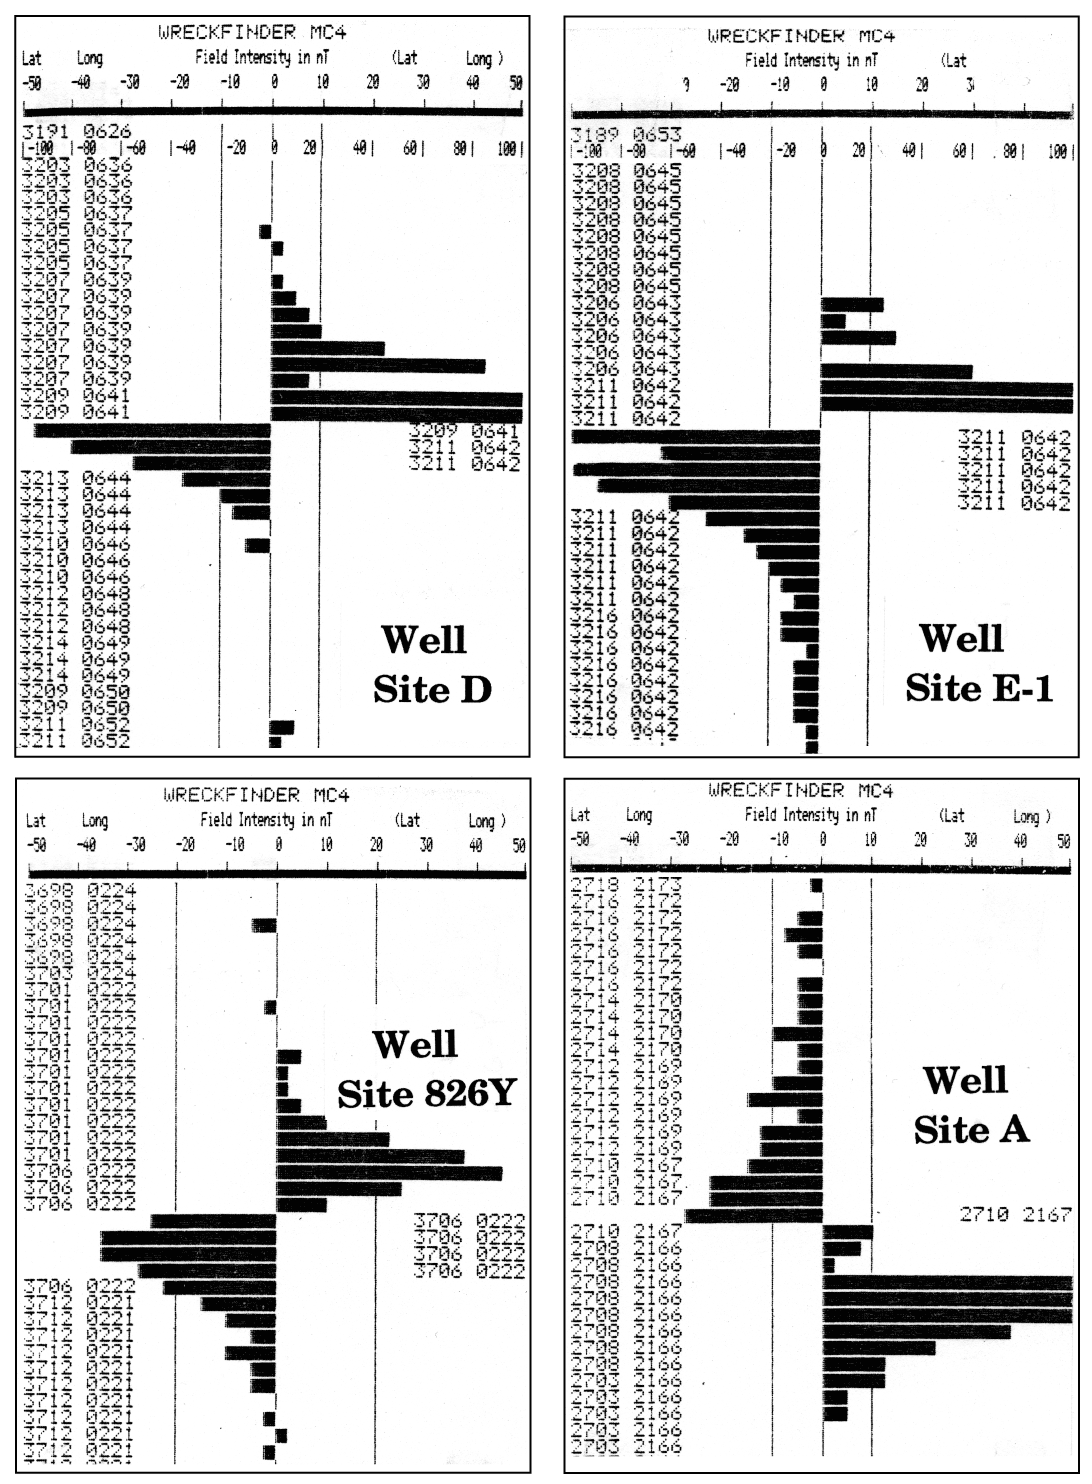 Examples of magnetometer records show intense magnetic anomalies at the shallow well sites.